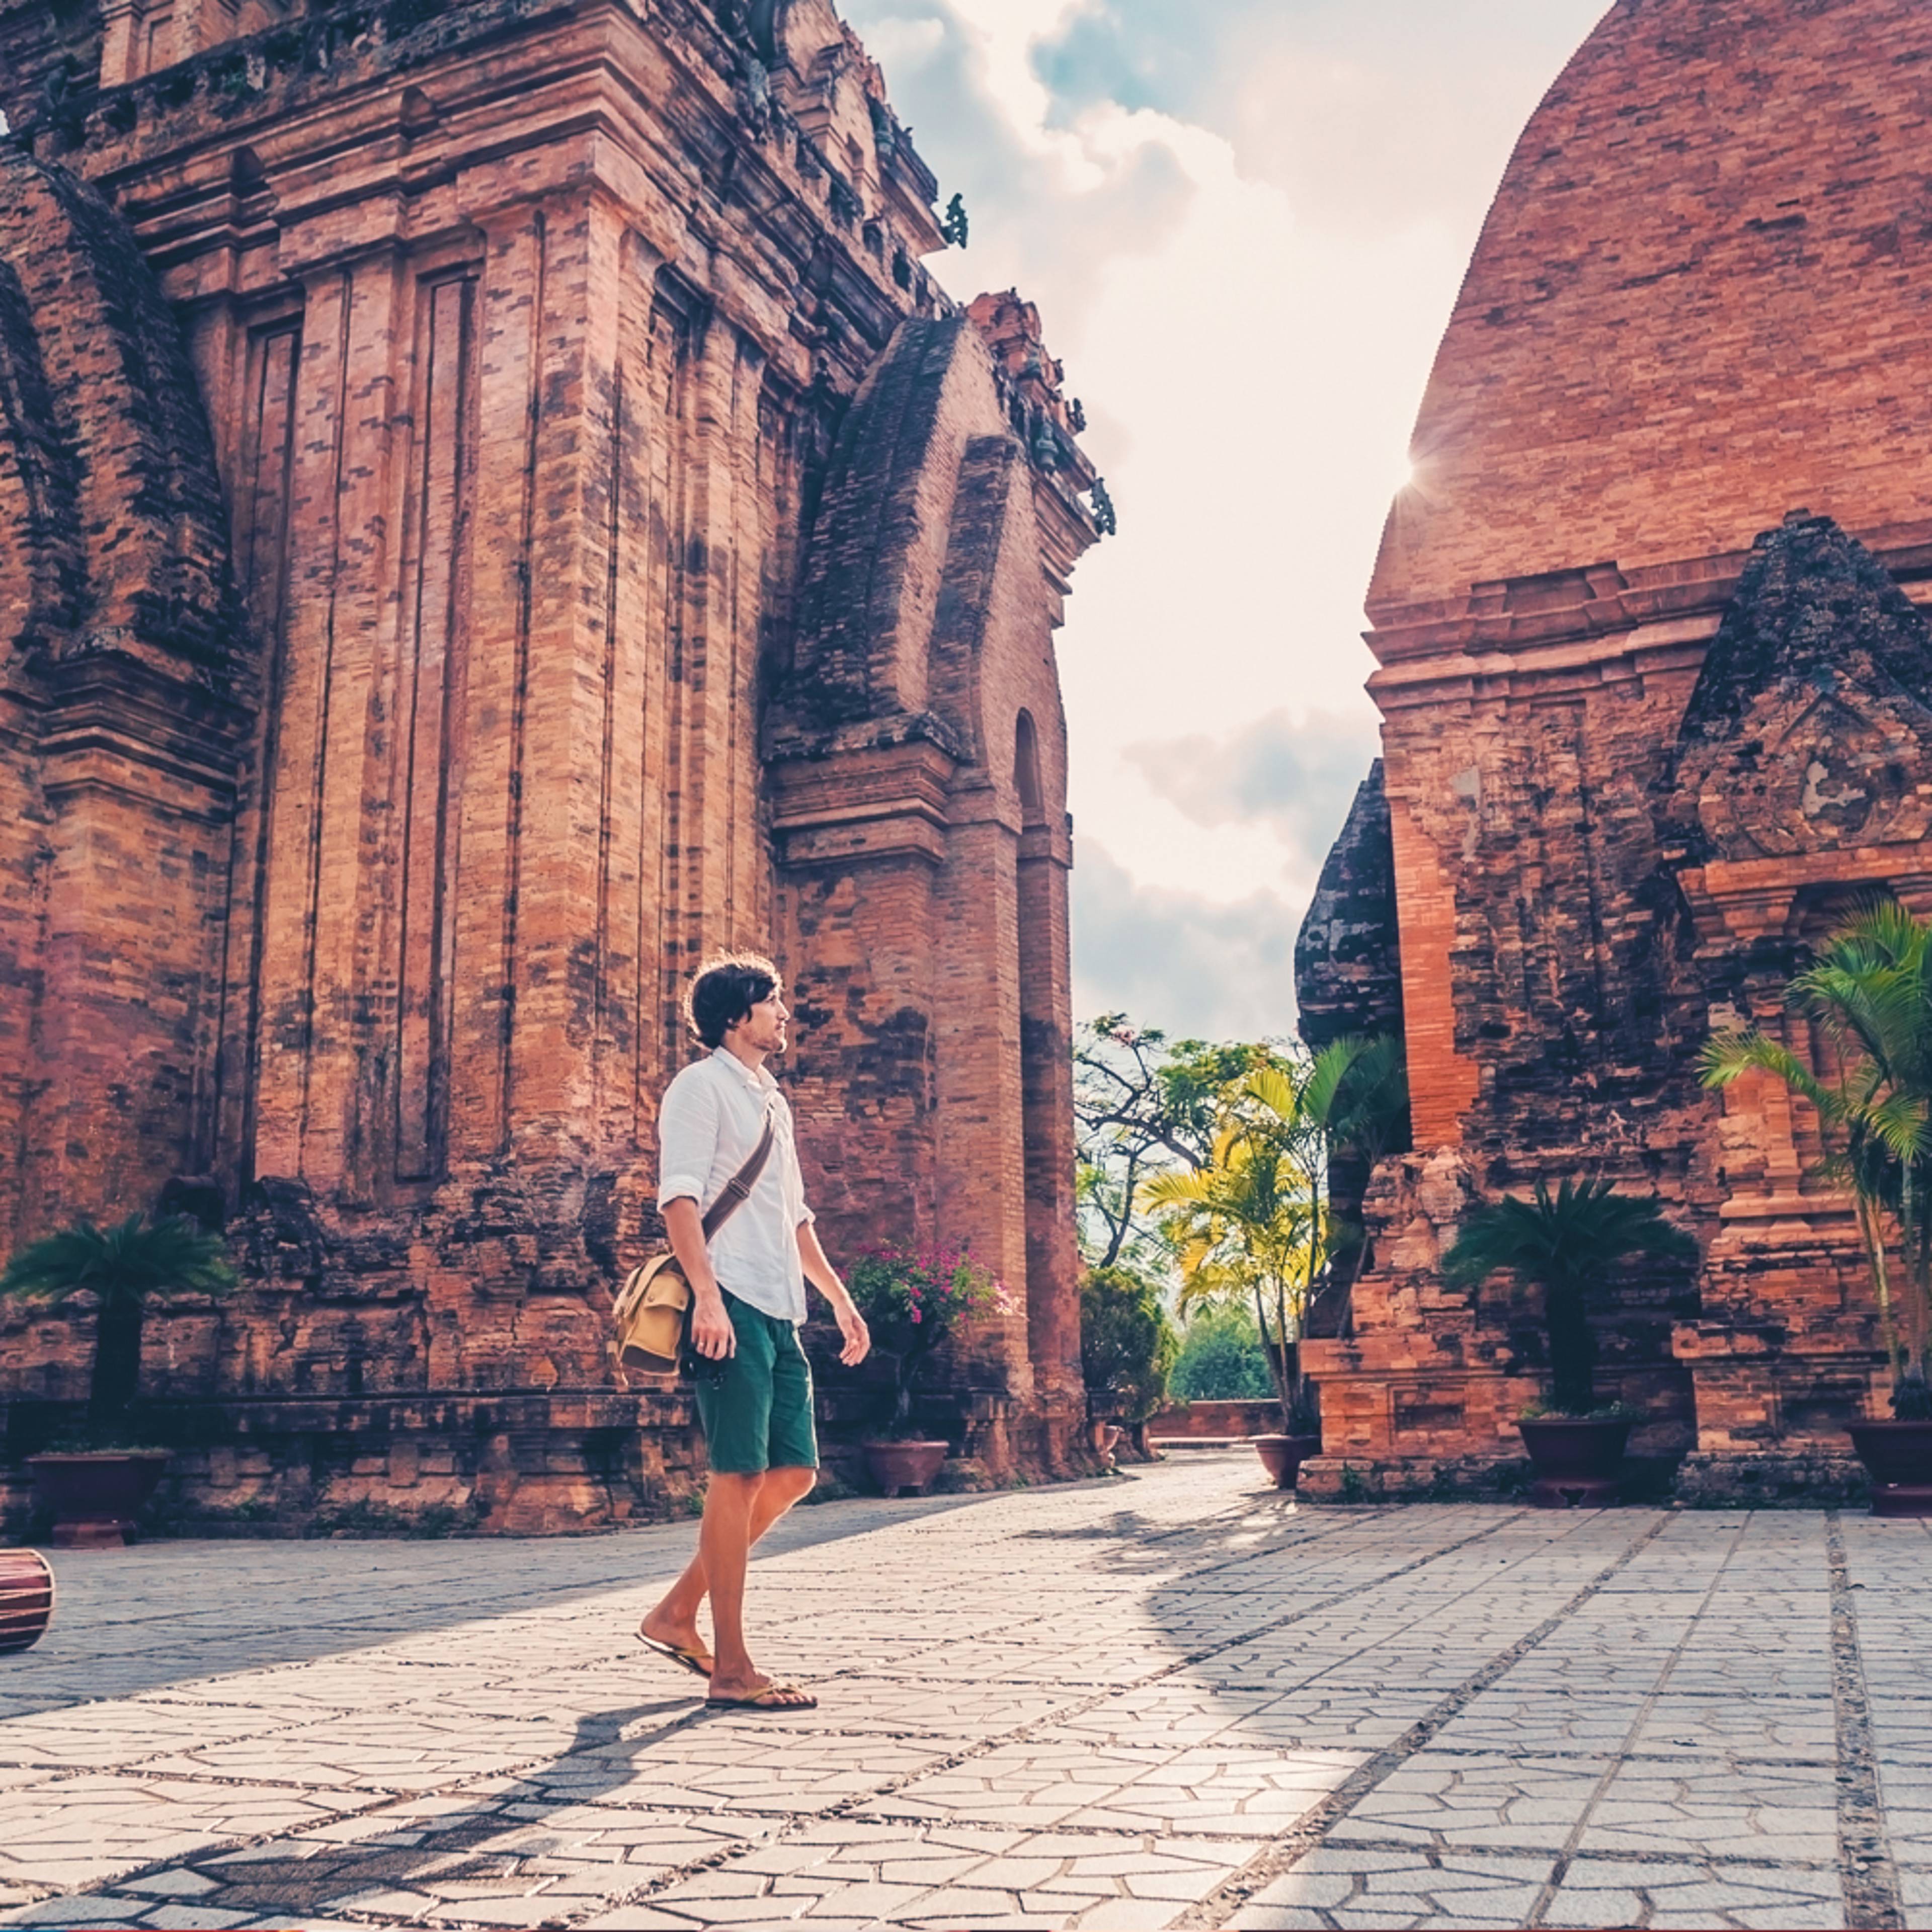 Design your perfect solo trip with a local expert in Vietnam